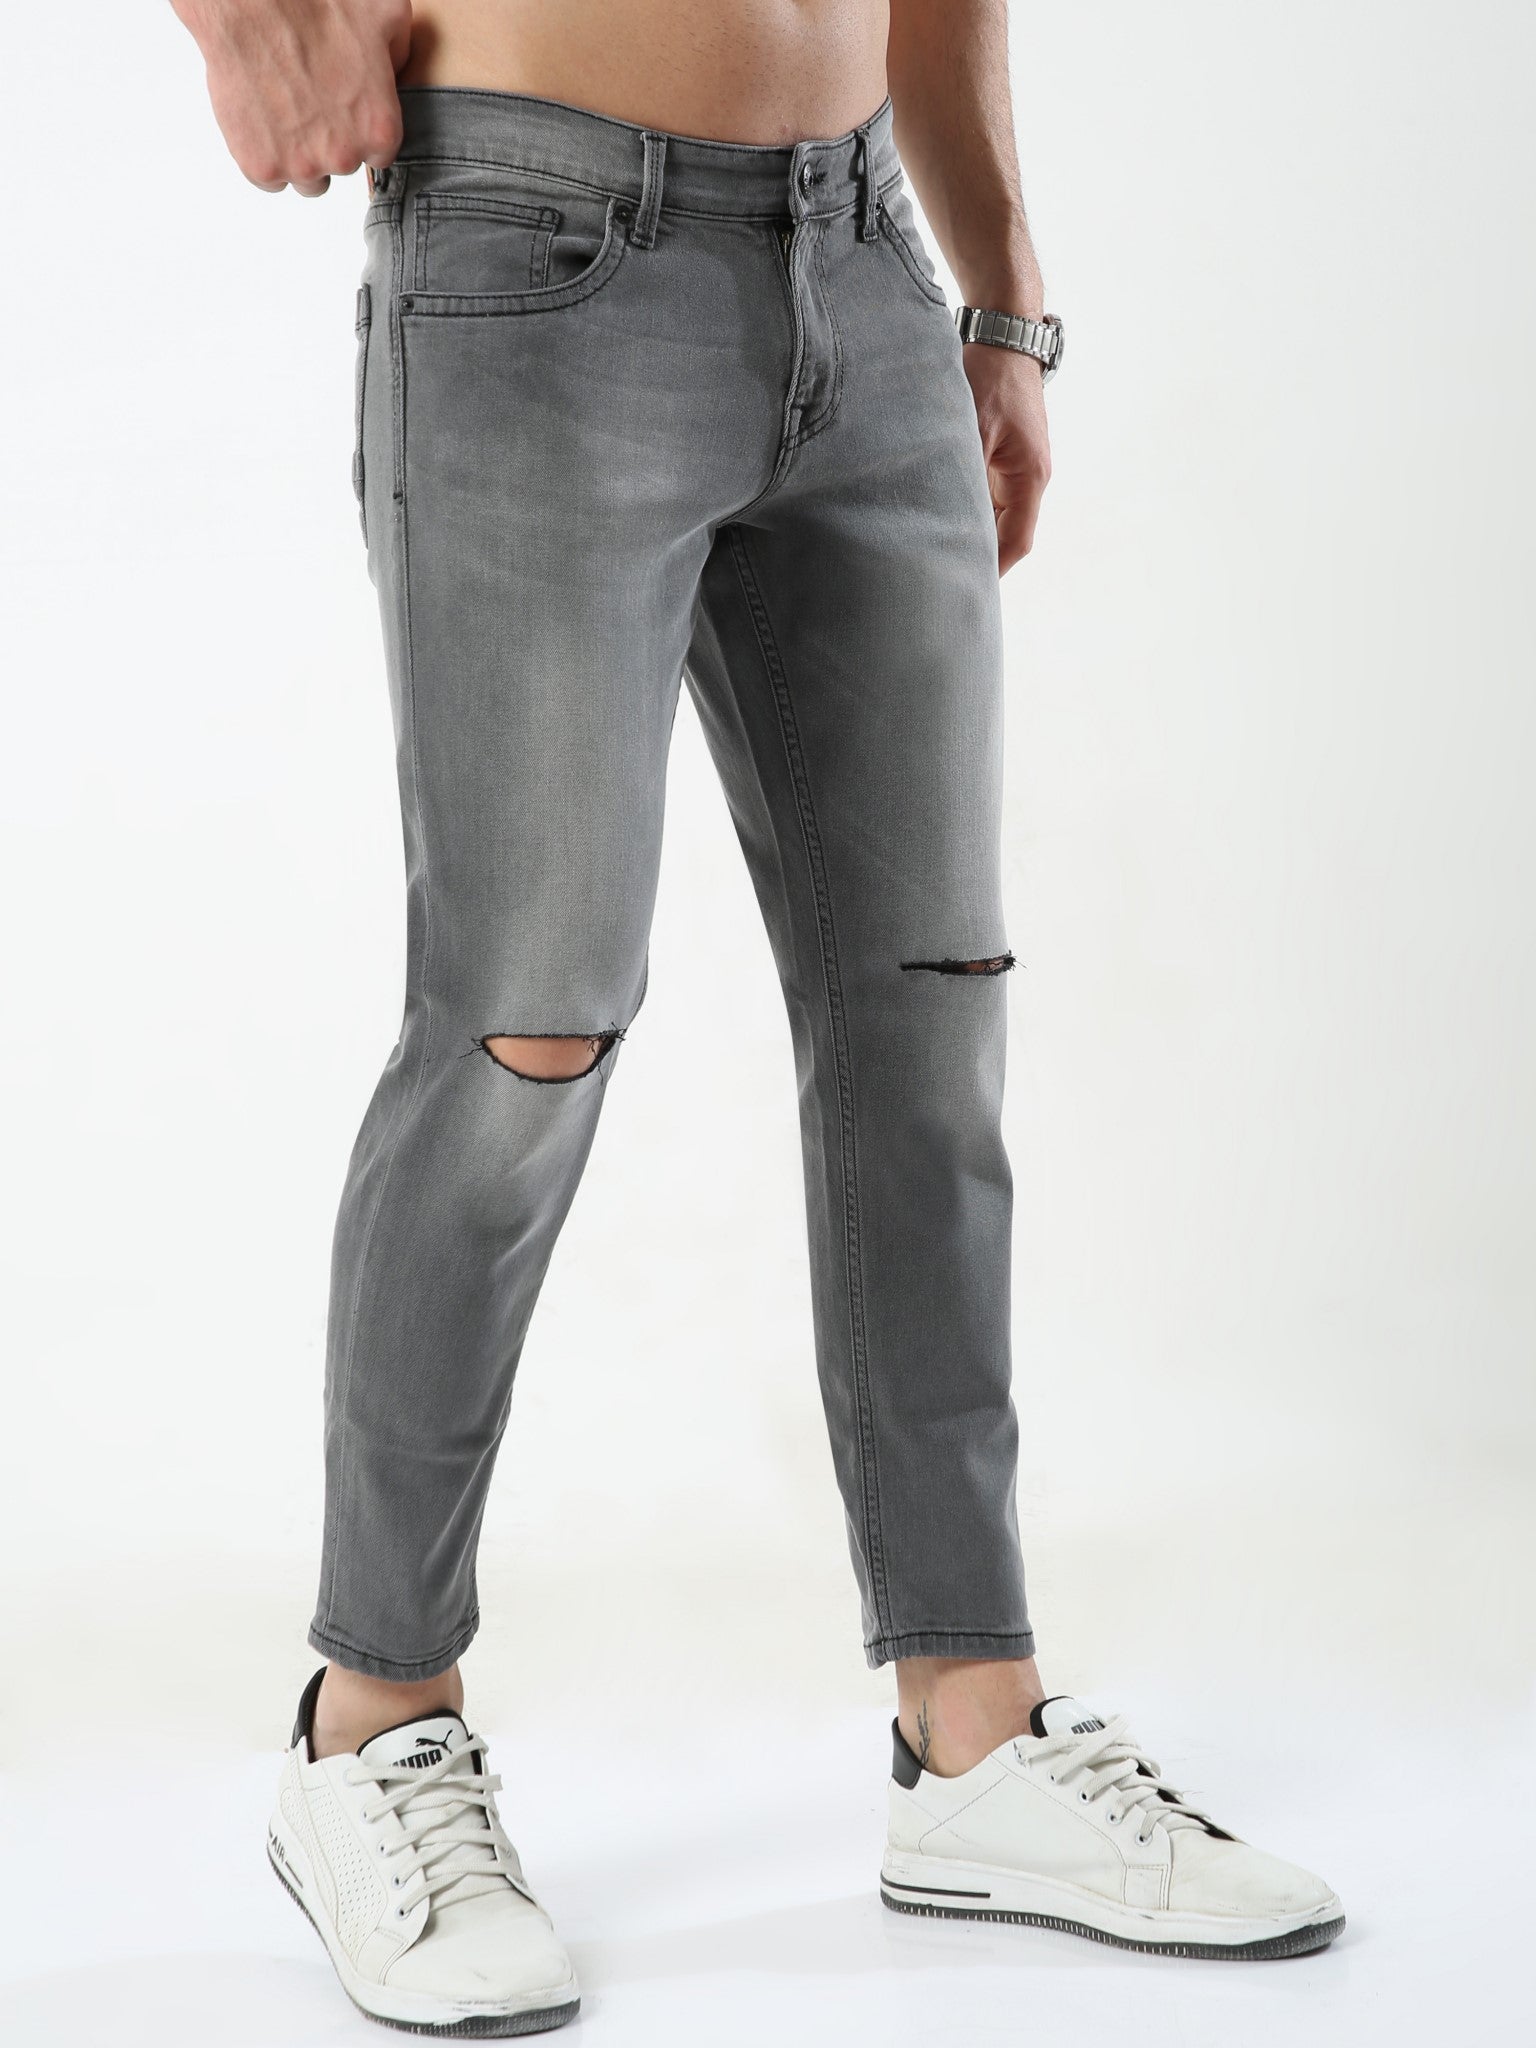 Ghost Gray Skinny Jeans